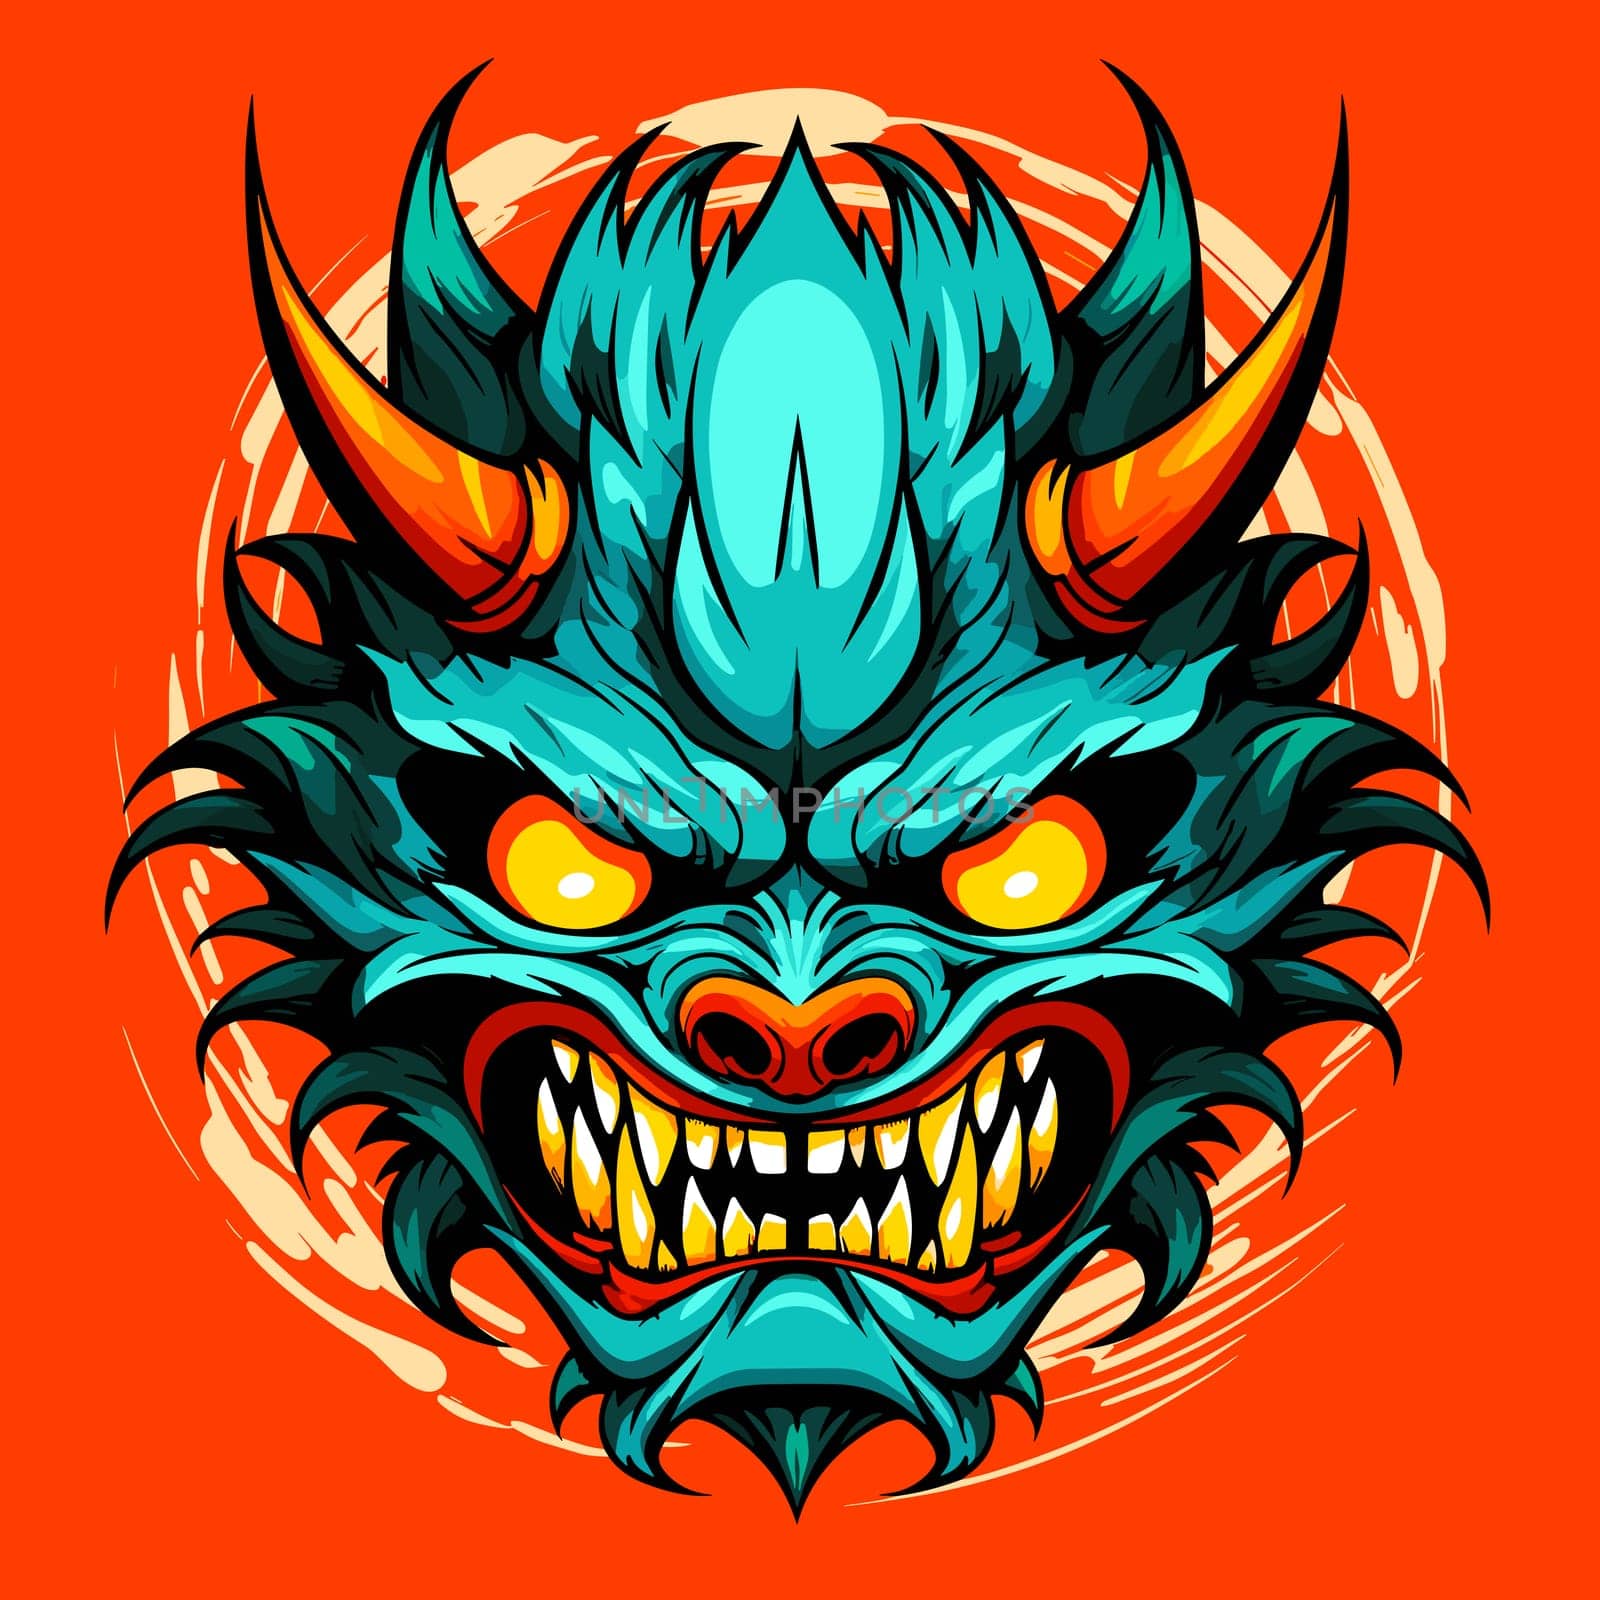 Terrible mythical monster of nightmares in vector art style. by palinchak